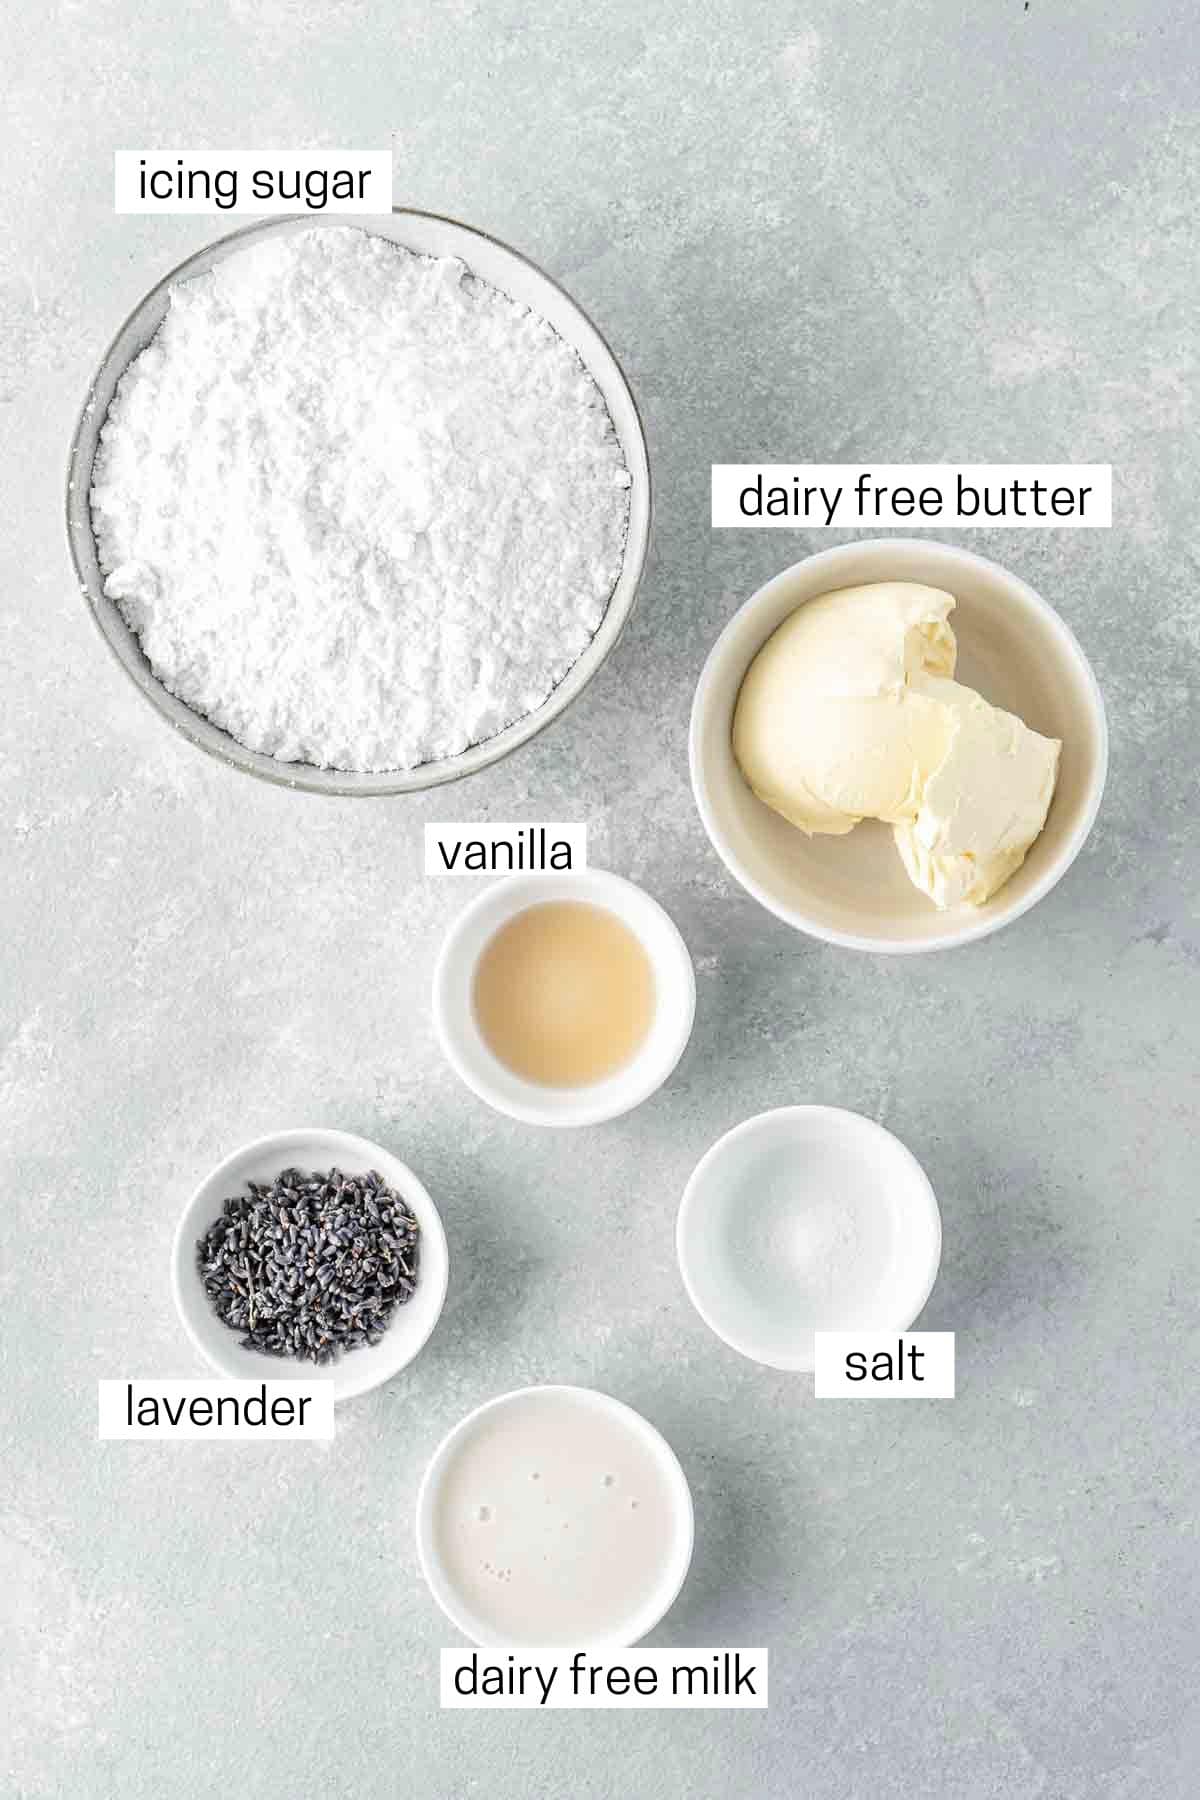 All ingredients needed for lavender buttercream laid out in bowls.